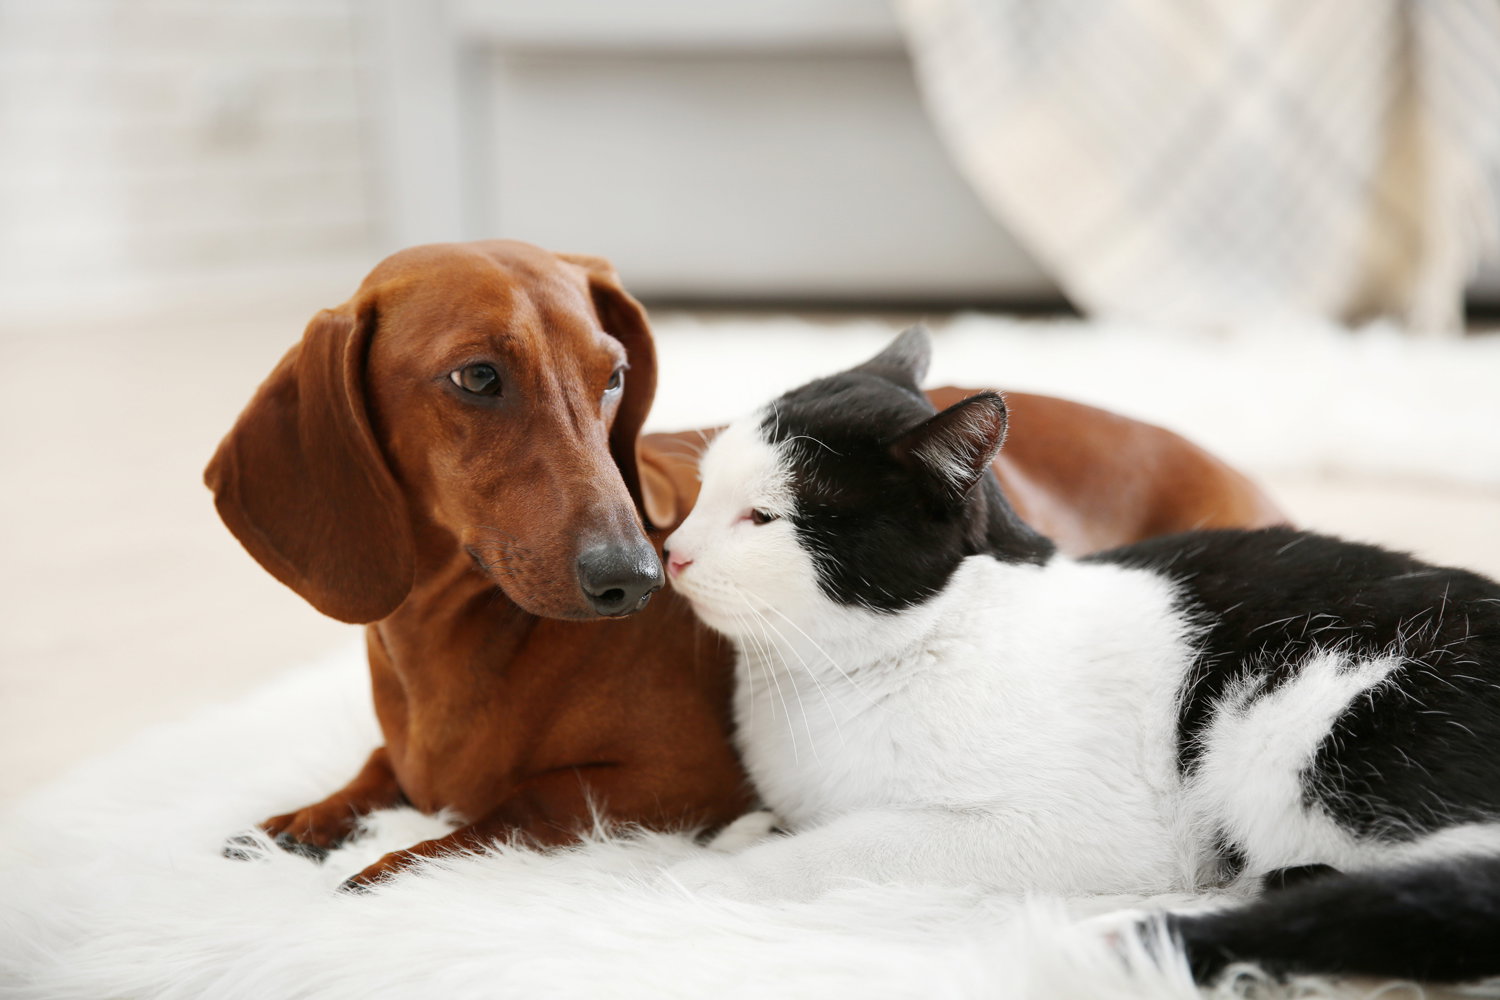 are dachshunds good with cats